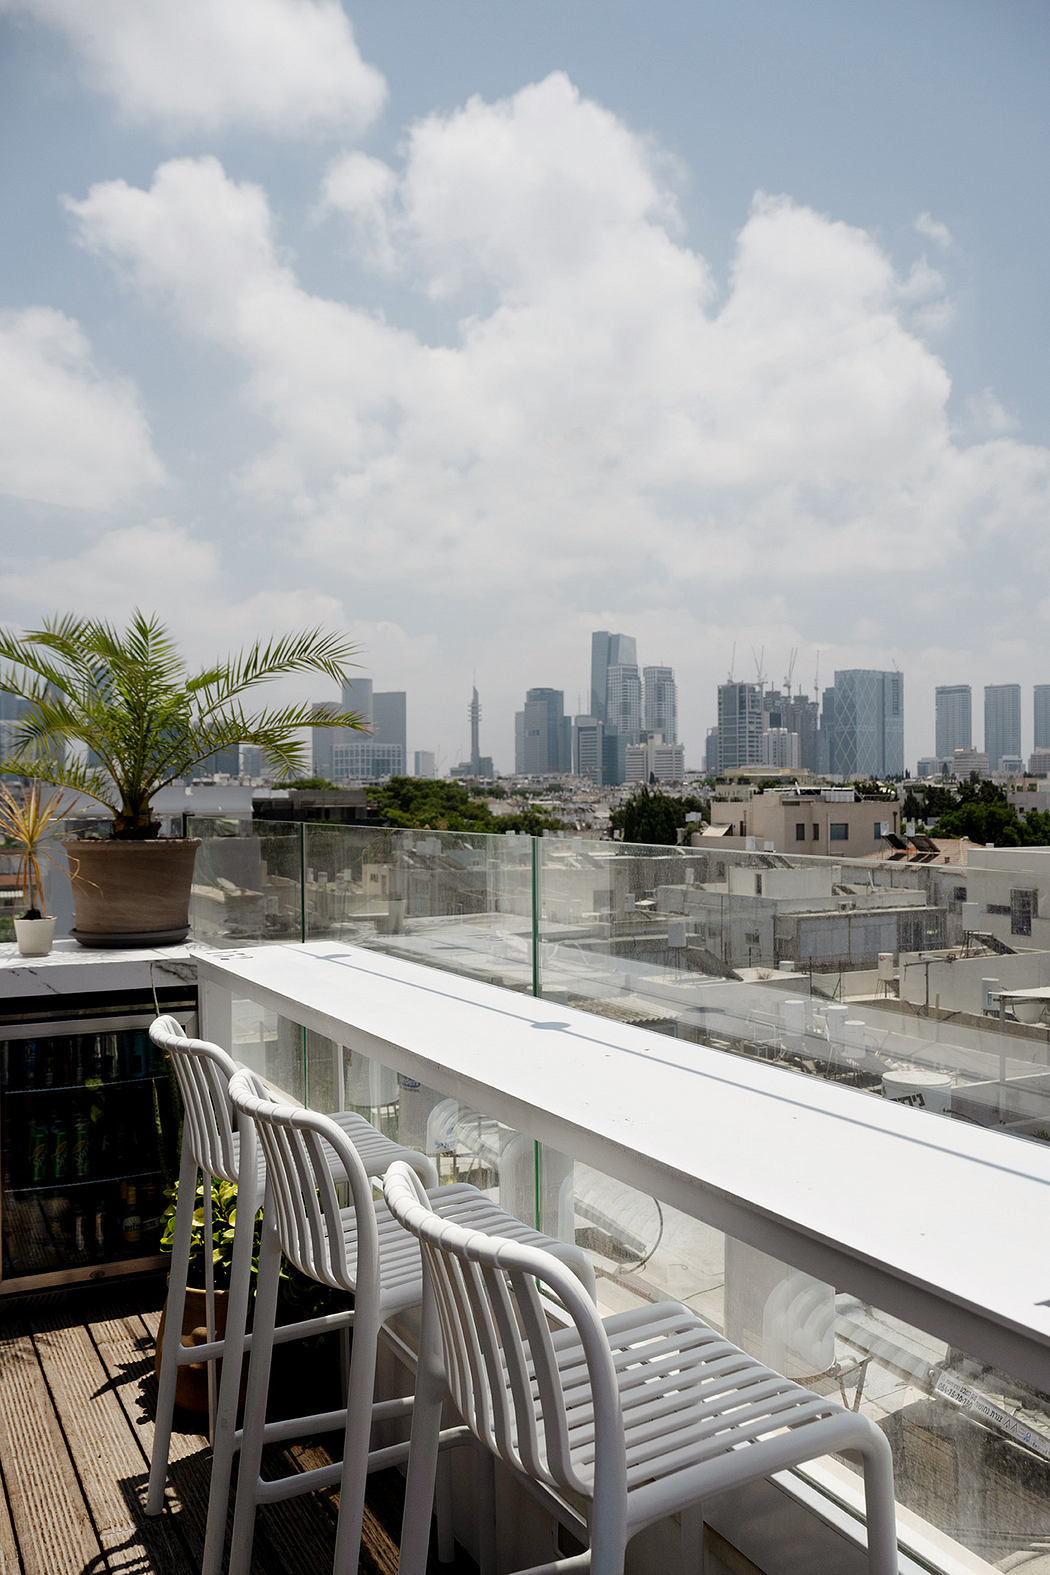 Rooftop patio with white chairs overlooking a city skyline.